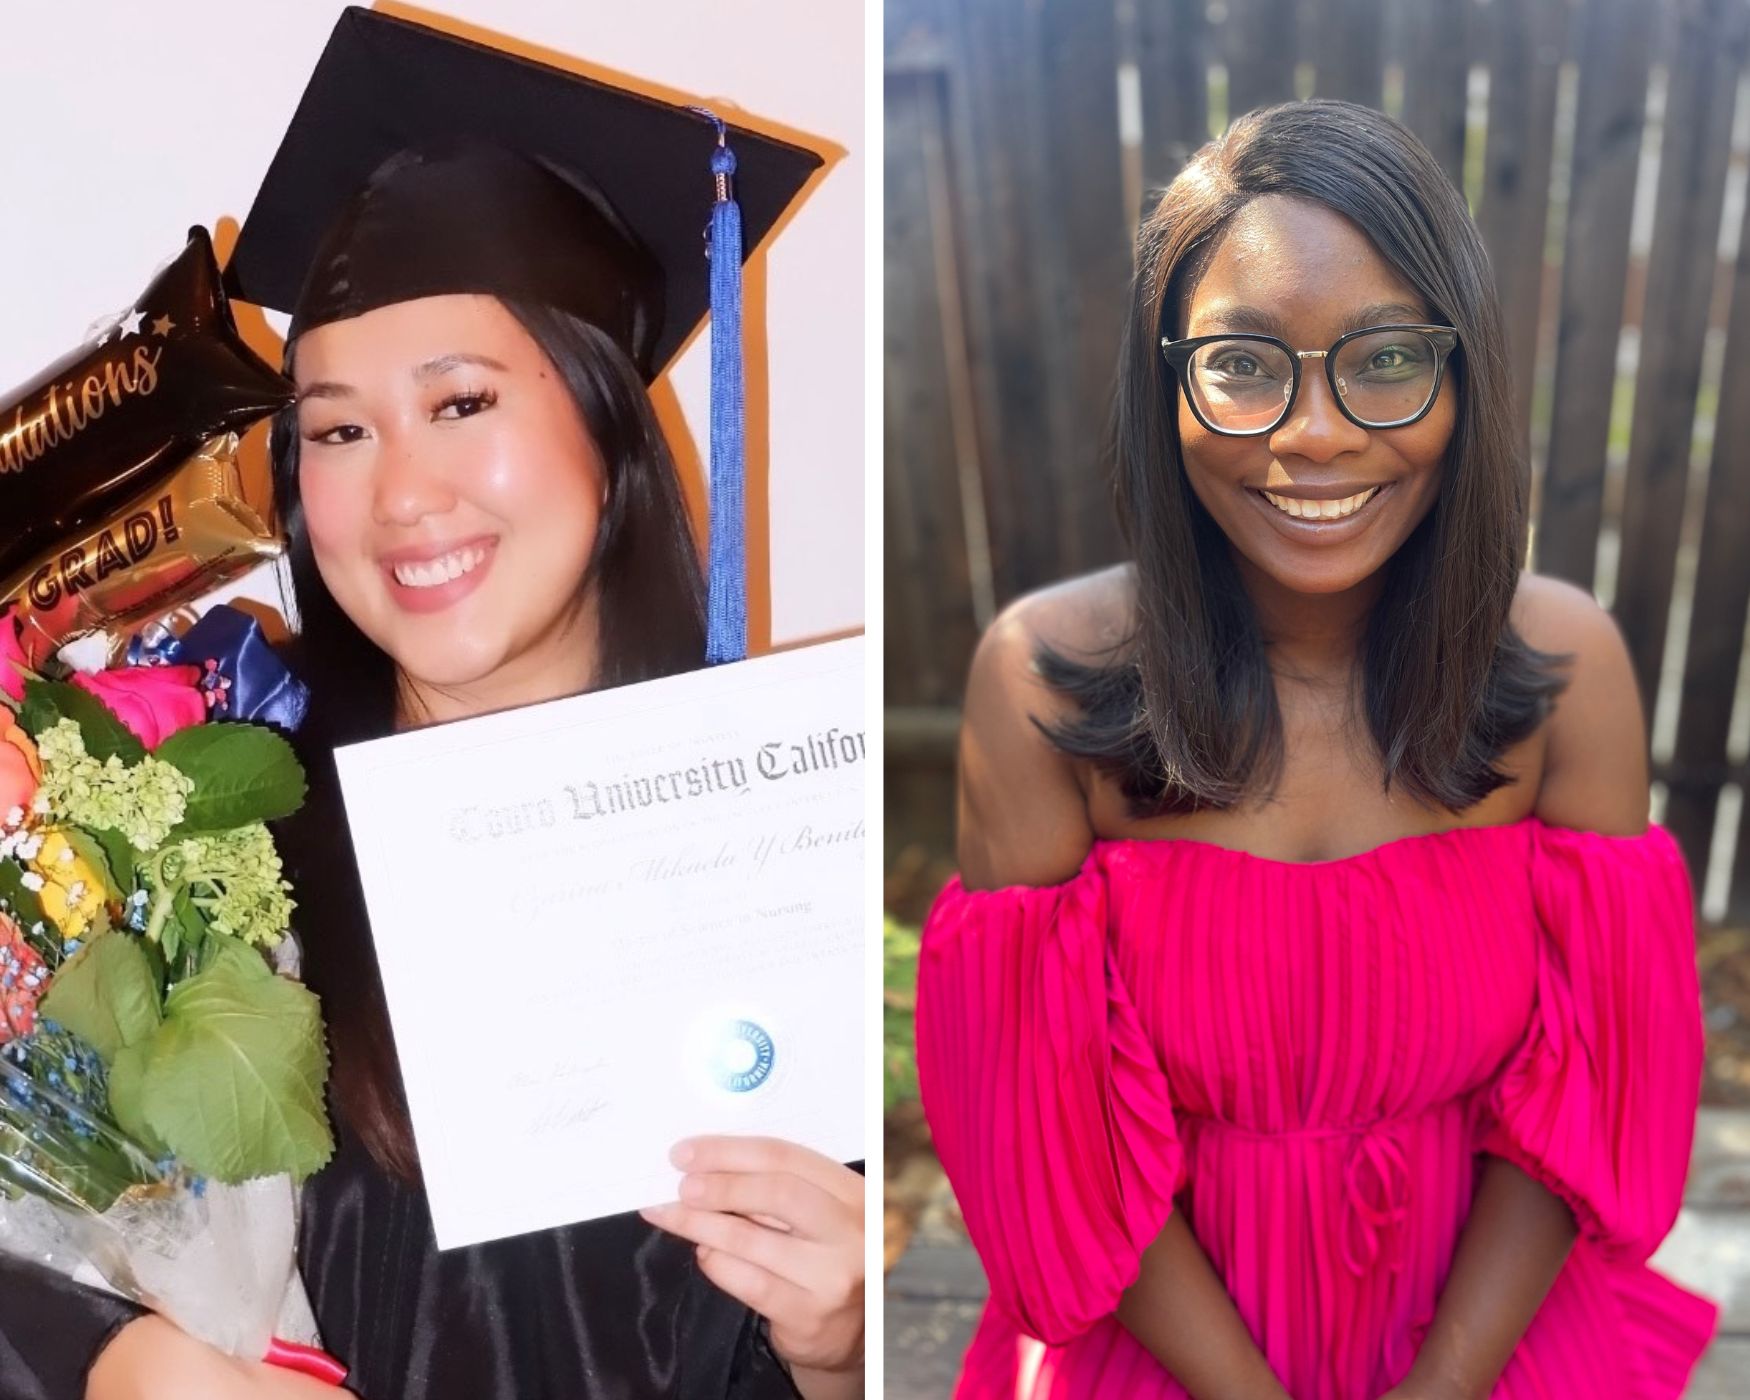 Split image of two people. On the left is Czarina Benitez, a student wearing a black graduation gown holding a diploma and a bouquet of flowers. On the right is Jessica Robertson outside wearing a red dress and glasses with a wooden fence behind her